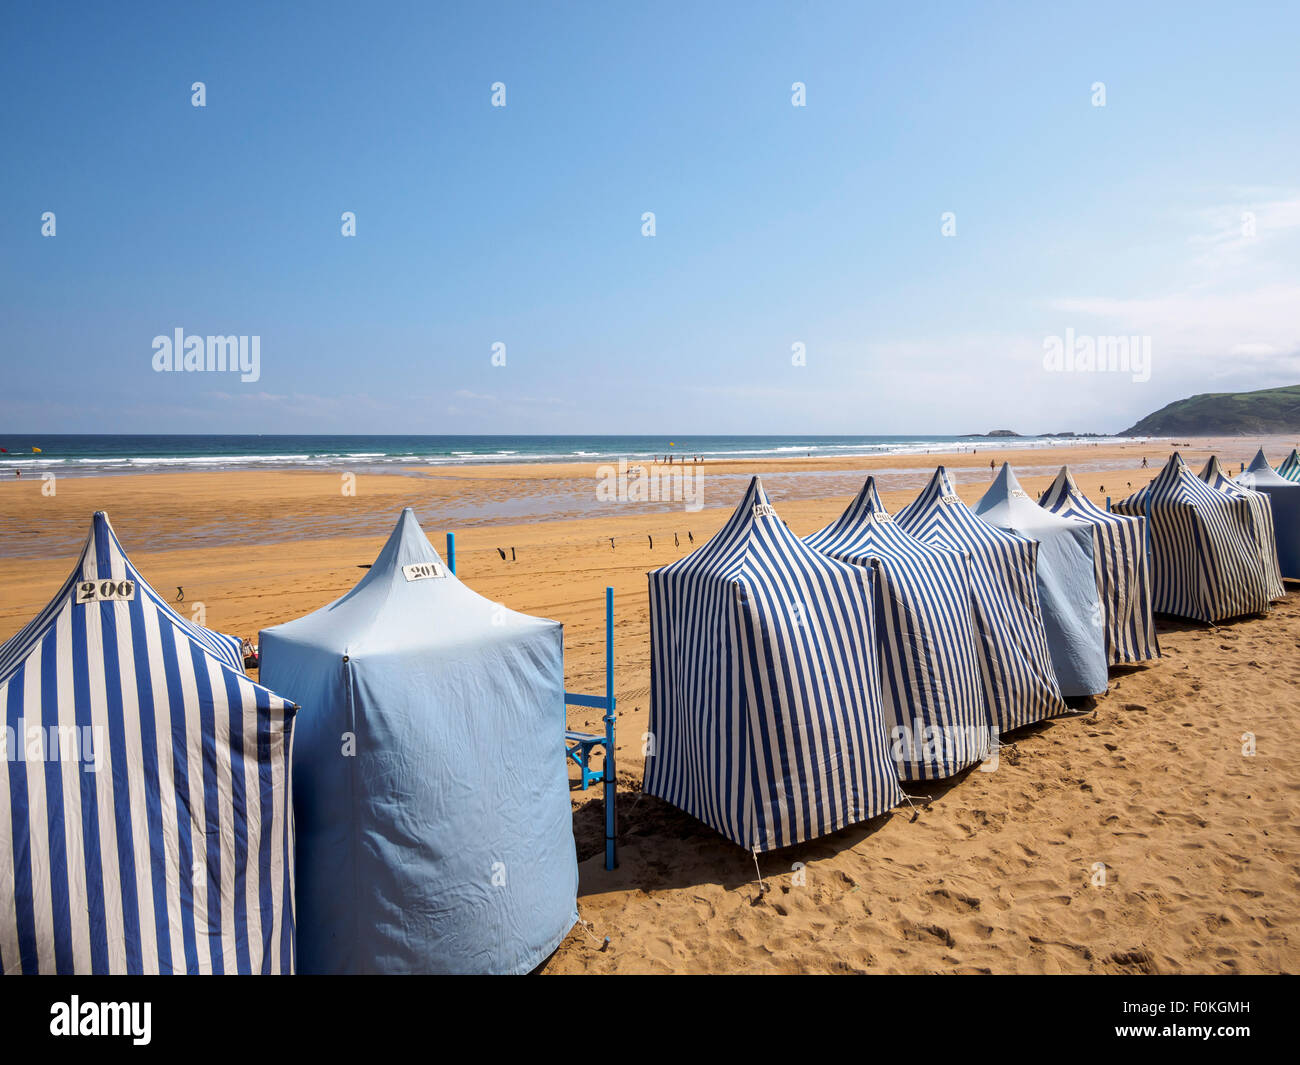 Spain, Zarauz, view to the beach with row of tents Stock Photo